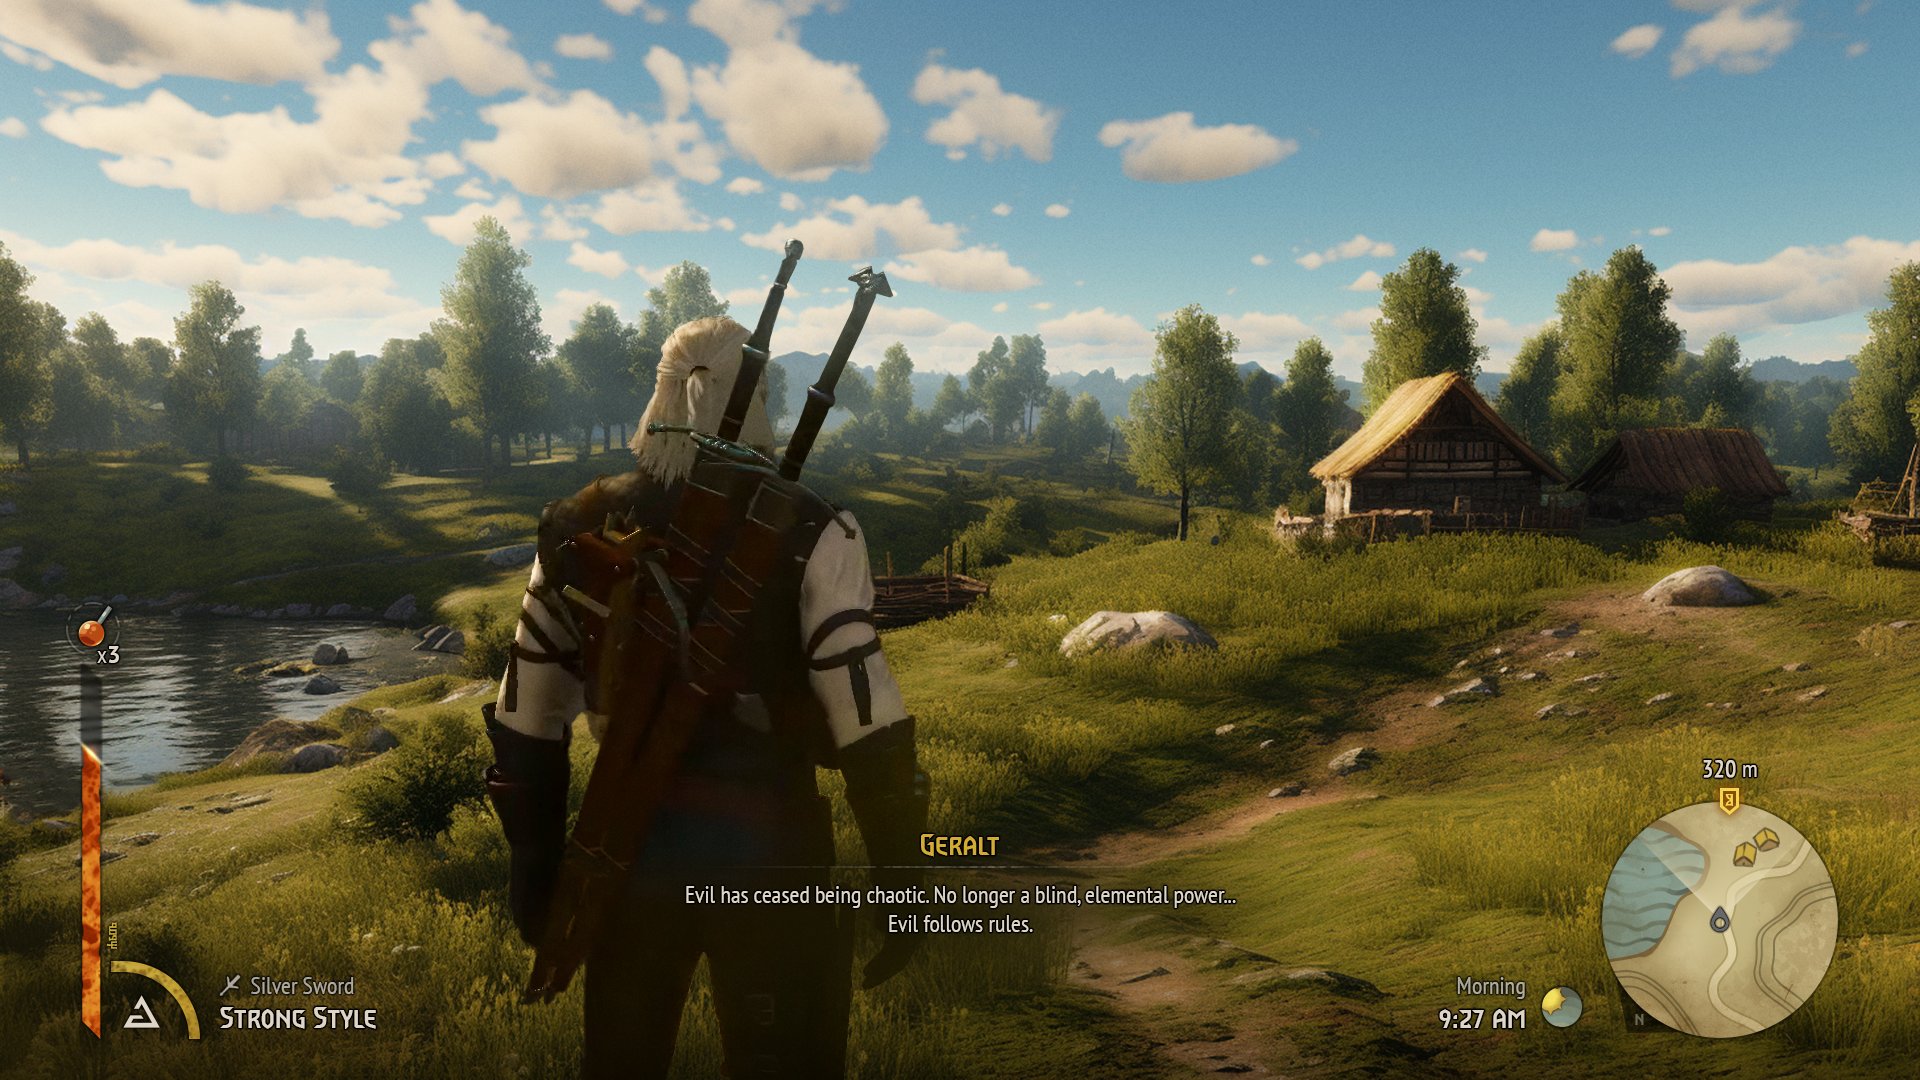 The Witcher Remake is being built in Unreal Engine 5